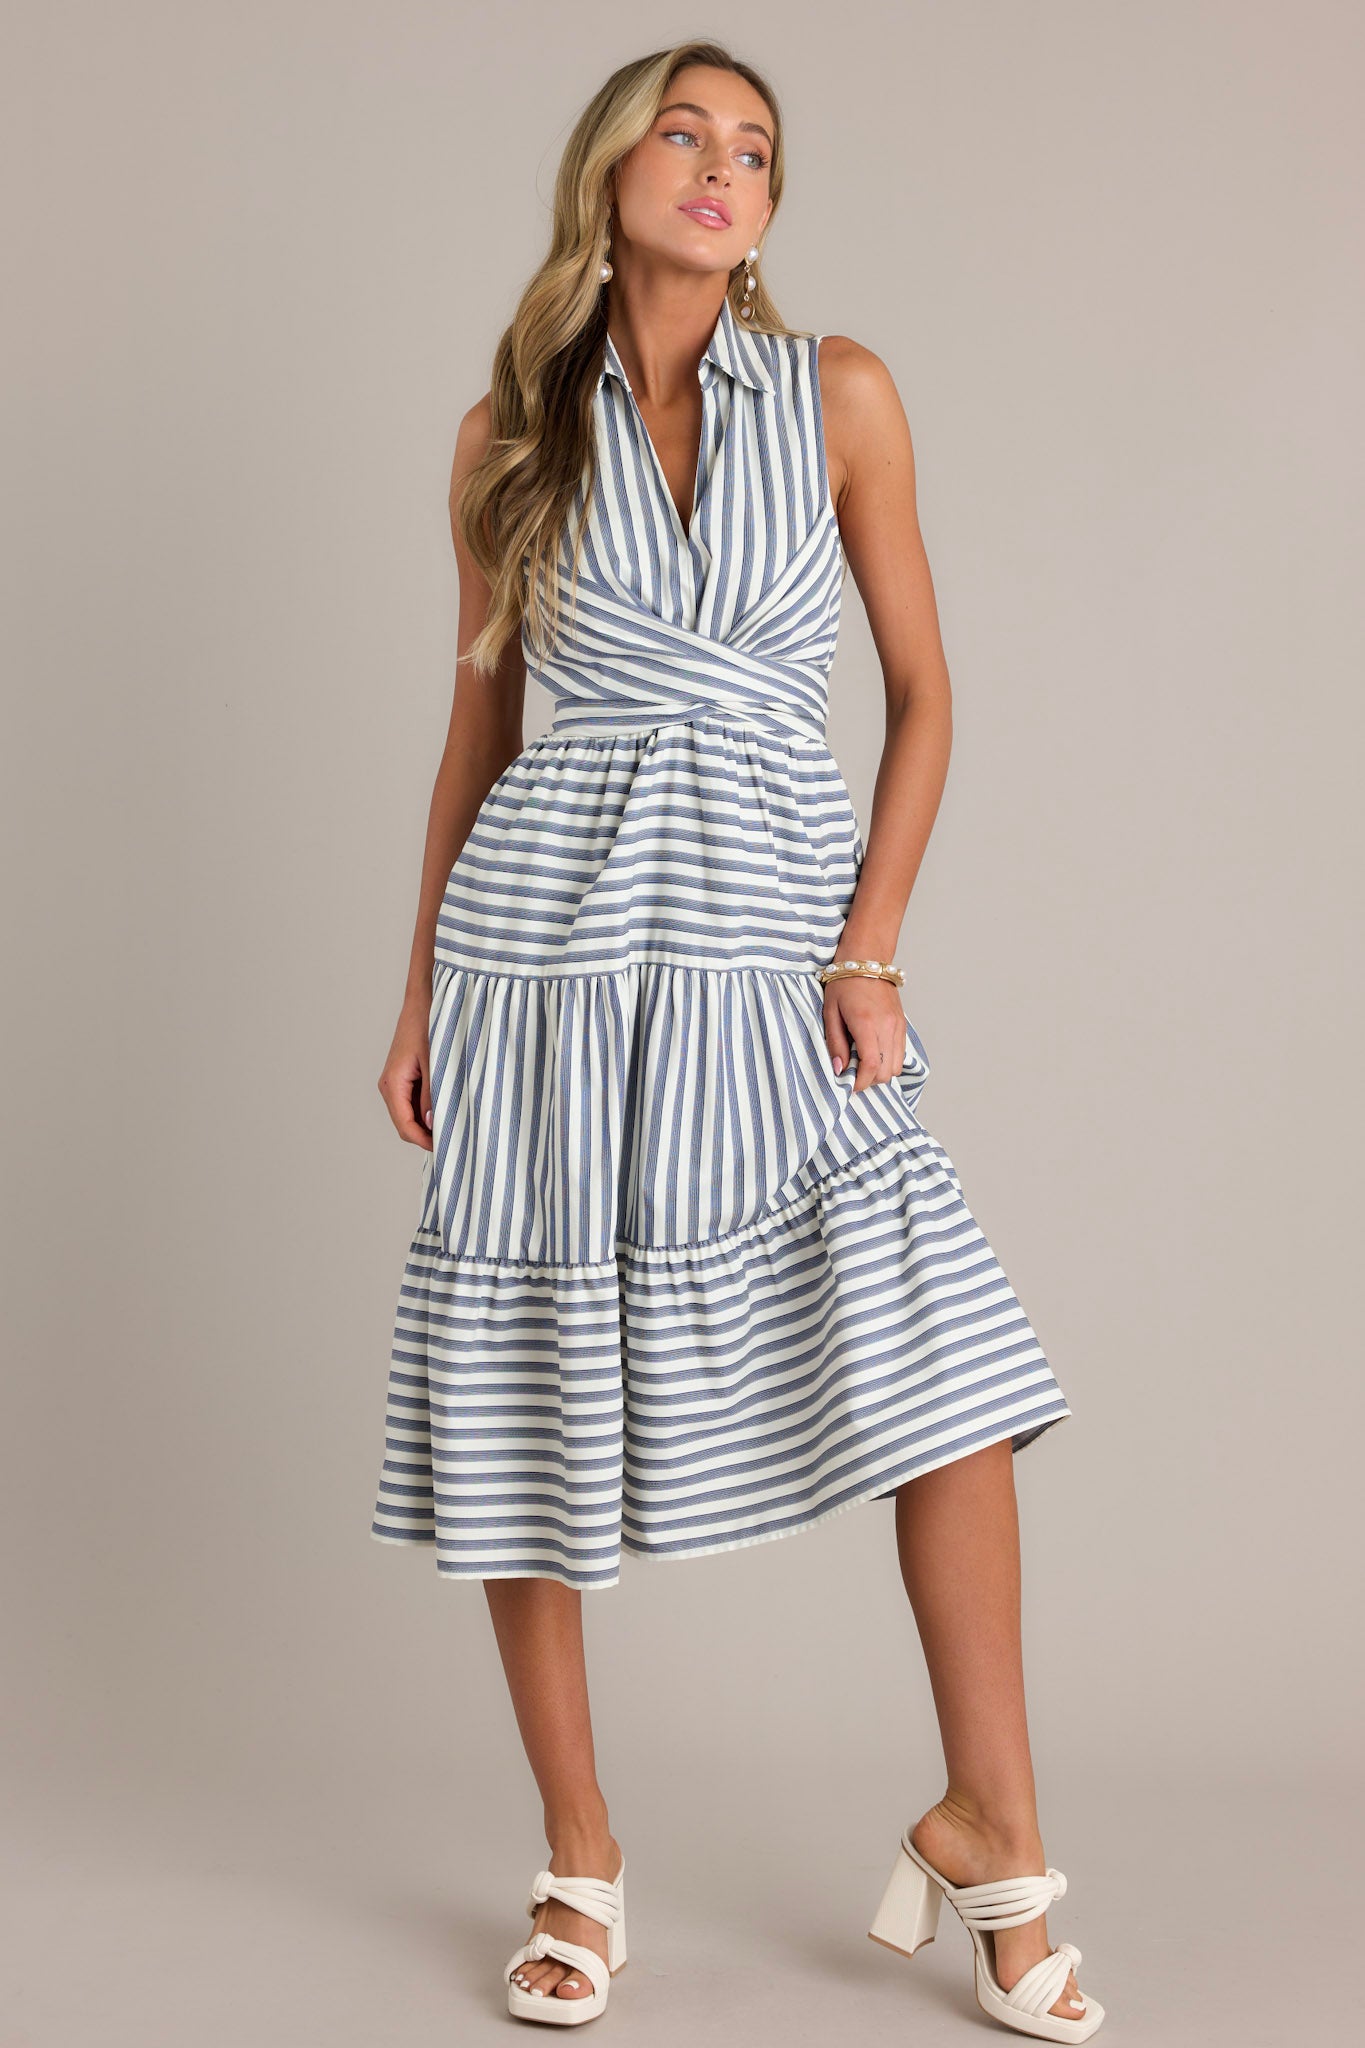 This navy stripe midi dress features a collared v-neckline, a self-tie waist feature that can be in the front or back, an elastic waist insert, functional hip pockets, and a sleeveless design.